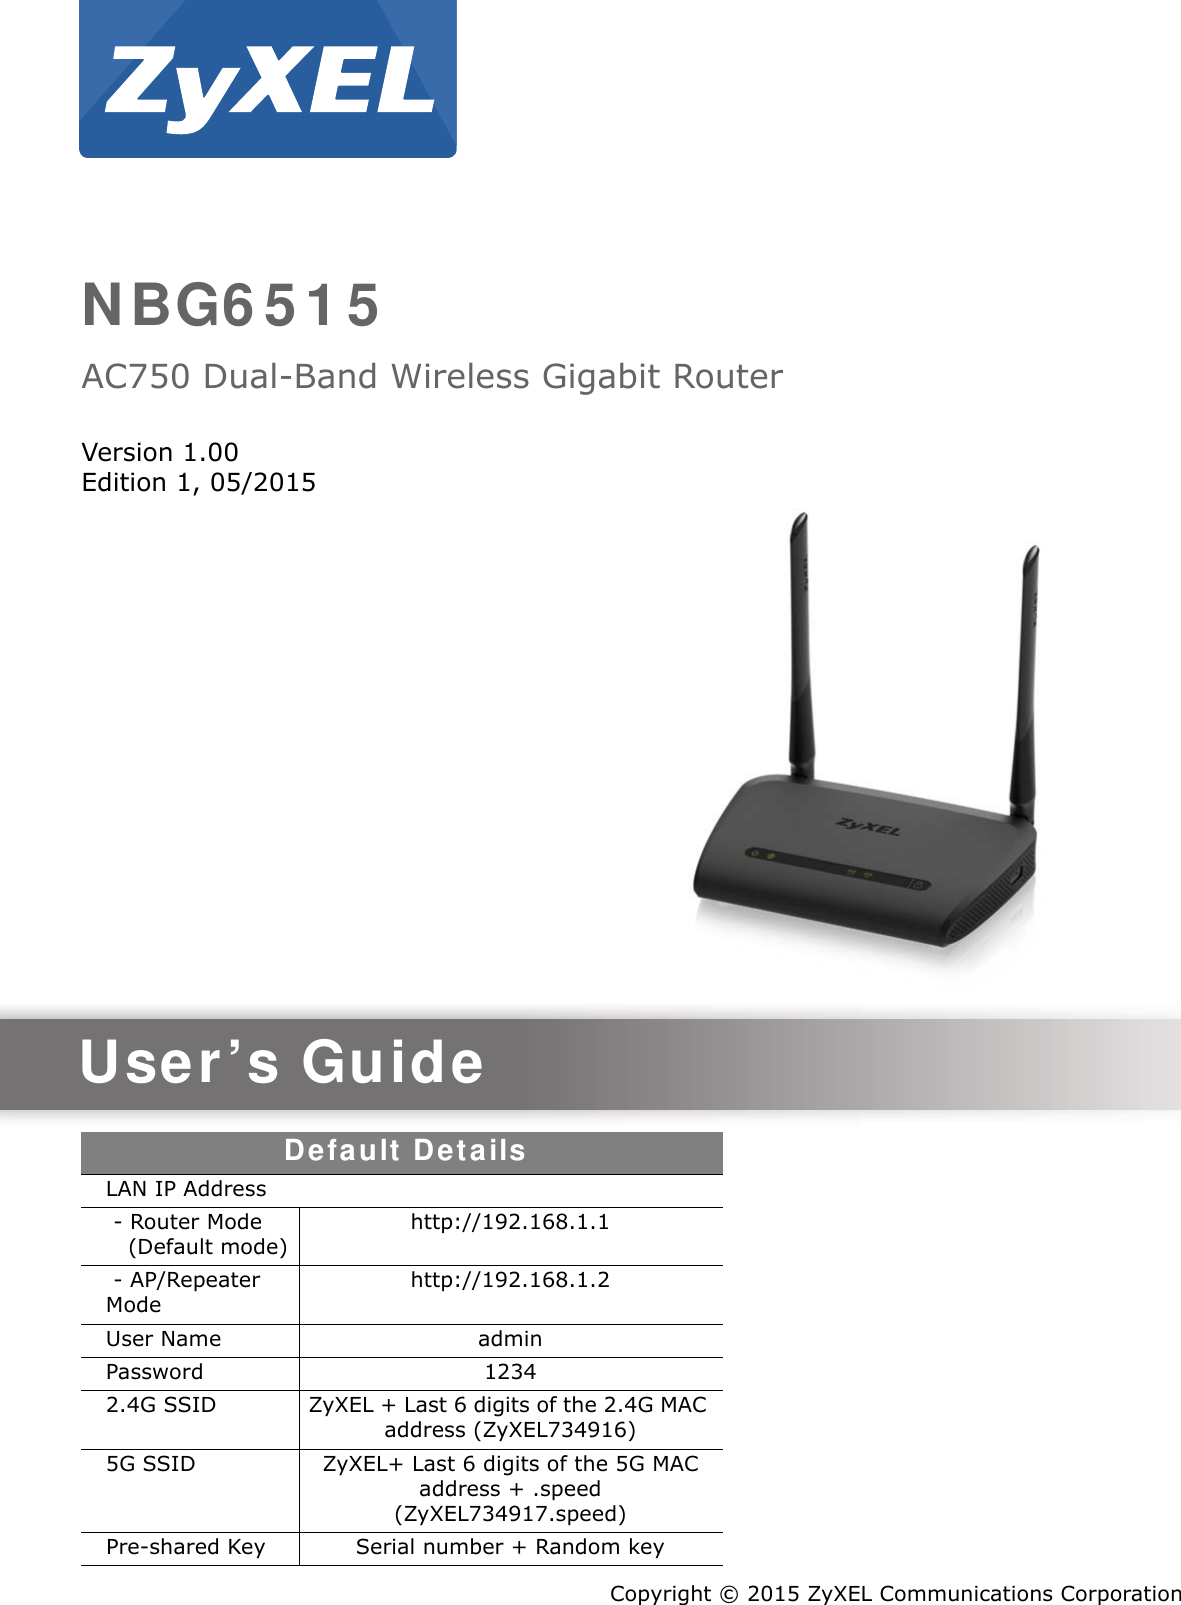 Quick Start Guidewww.zyxel.comNBG6515AC750 Dual-Band Wireless Gigabit RouterVersion 1.00Edition 1, 05/2015User’s GuideDefault DetailsLAN IP Address - Router Mode    (Default mode) http://192.168.1.1 - AP/Repeater  Mode http://192.168.1.2User Name adminPassword 12342.4G SSID ZyXEL + Last 6 digits of the 2.4G MAC address (ZyXEL734916)5G SSID ZyXEL+ Last 6 digits of the 5G MAC address + .speed(ZyXEL734917.speed)Pre-shared Key Serial number + Random keyCopyright © 2015 ZyXEL Communications Corporation